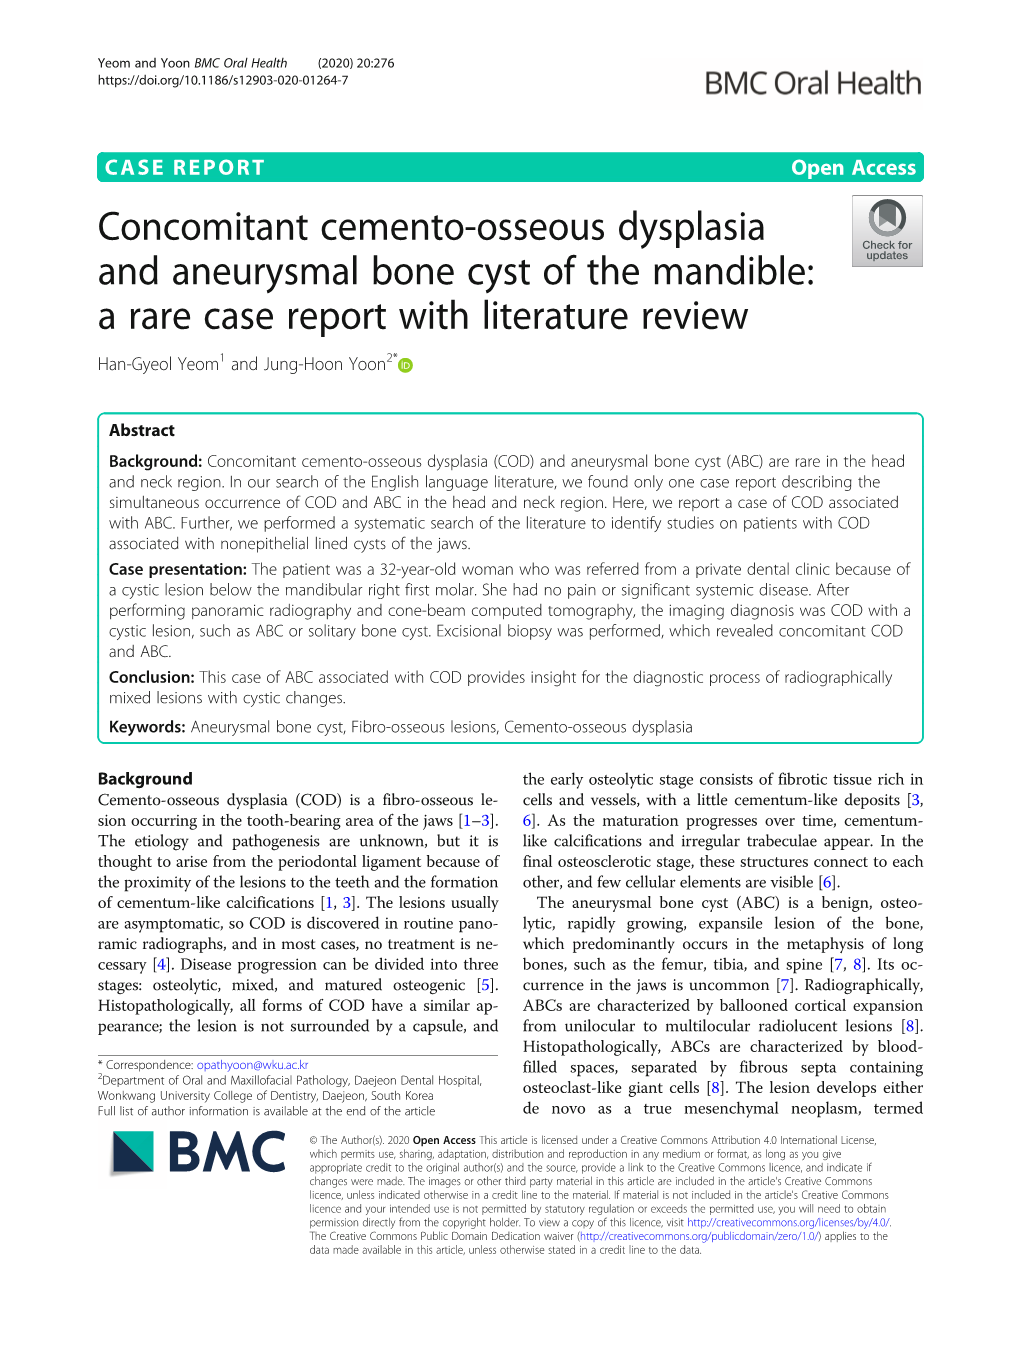 Concomitant Cemento-Osseous Dysplasia and Aneurysmal Bone Cyst of the Mandible: a Rare Case Report with Literature Review Han-Gyeol Yeom1 and Jung-Hoon Yoon2*